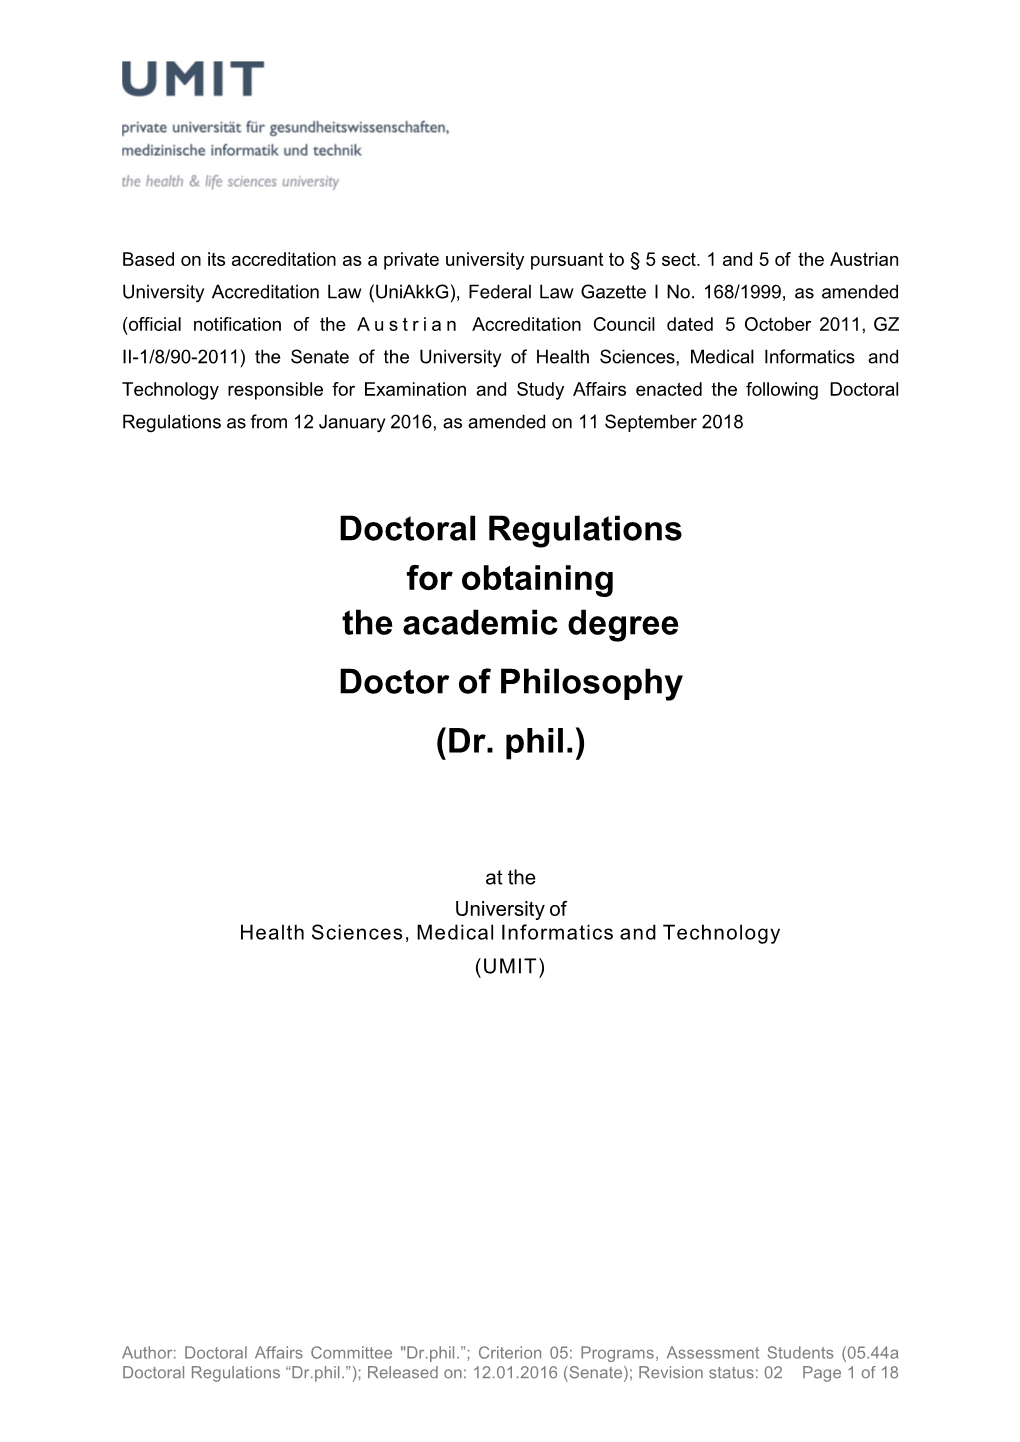 Doctoral Regulations for Obtaining the Academic Degree Doctor of Philosophy (Dr. Phil.)